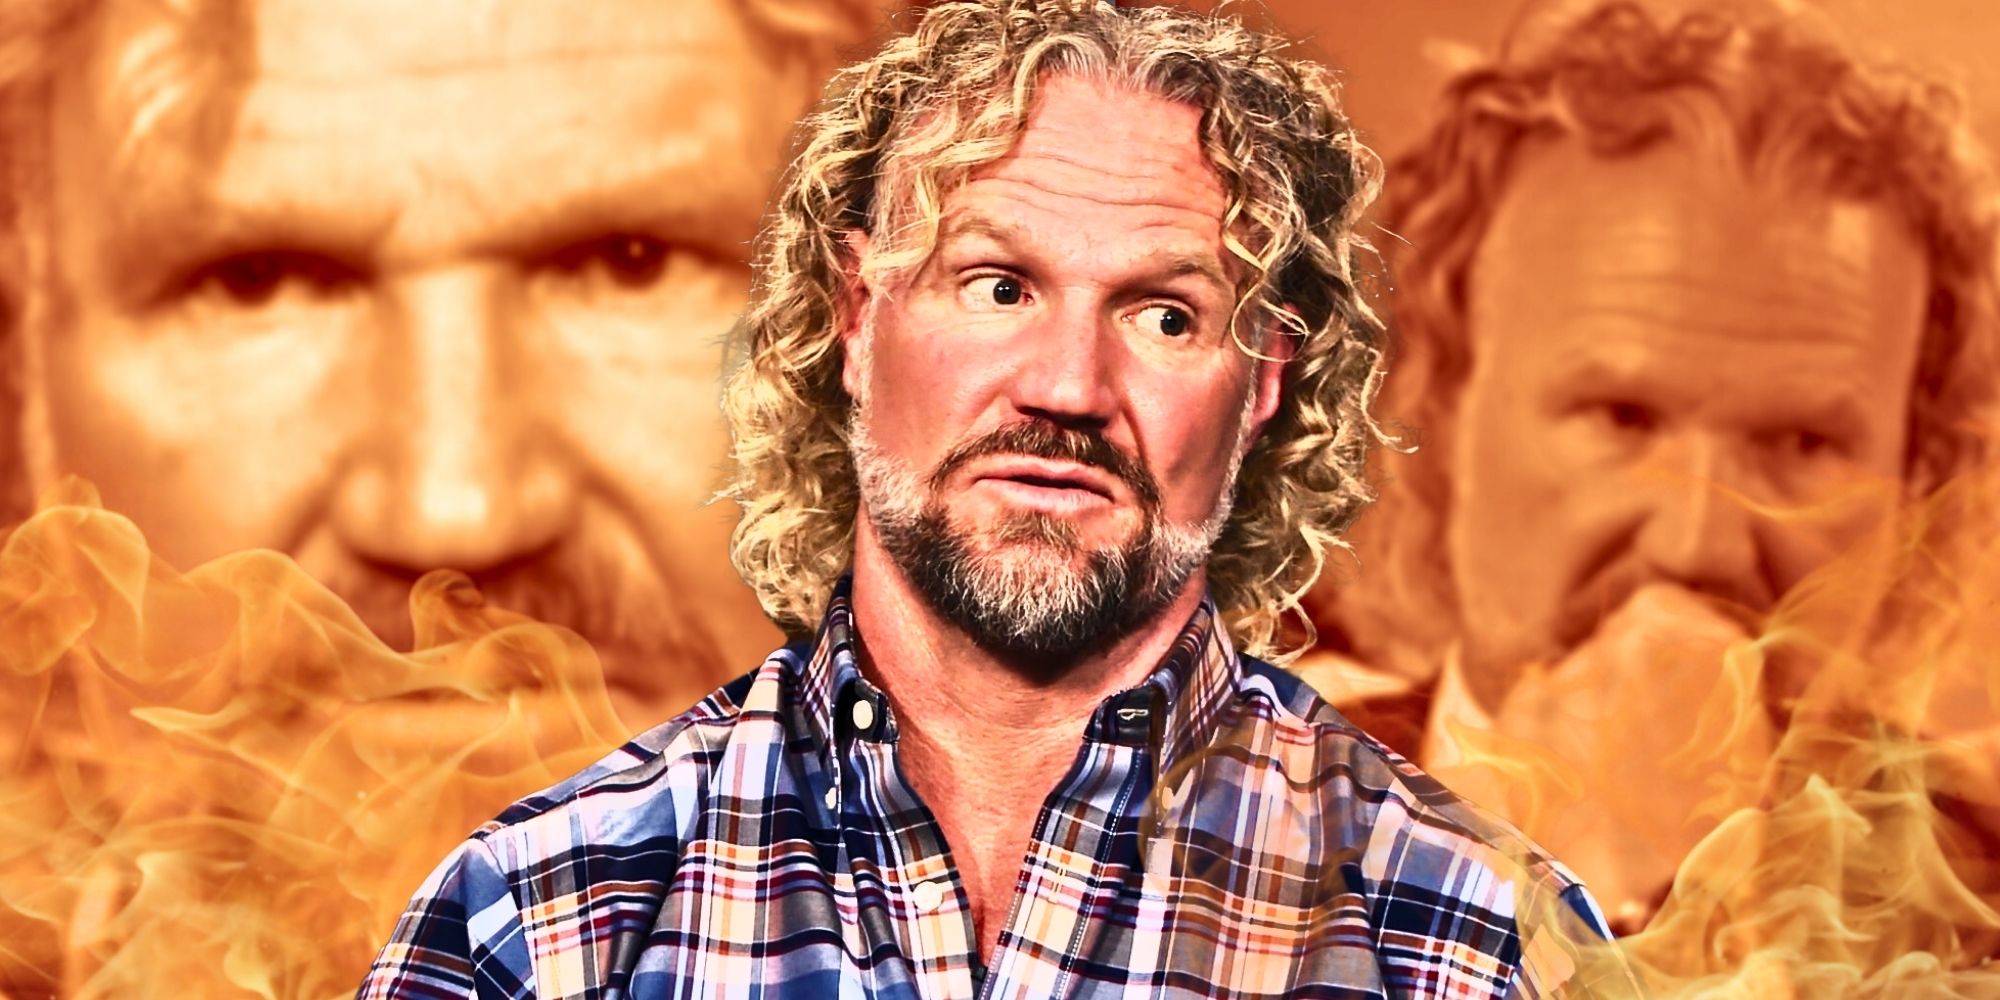 Sister Wives' Kody Brown wearing checked shirt and serious expression surrounded by flames